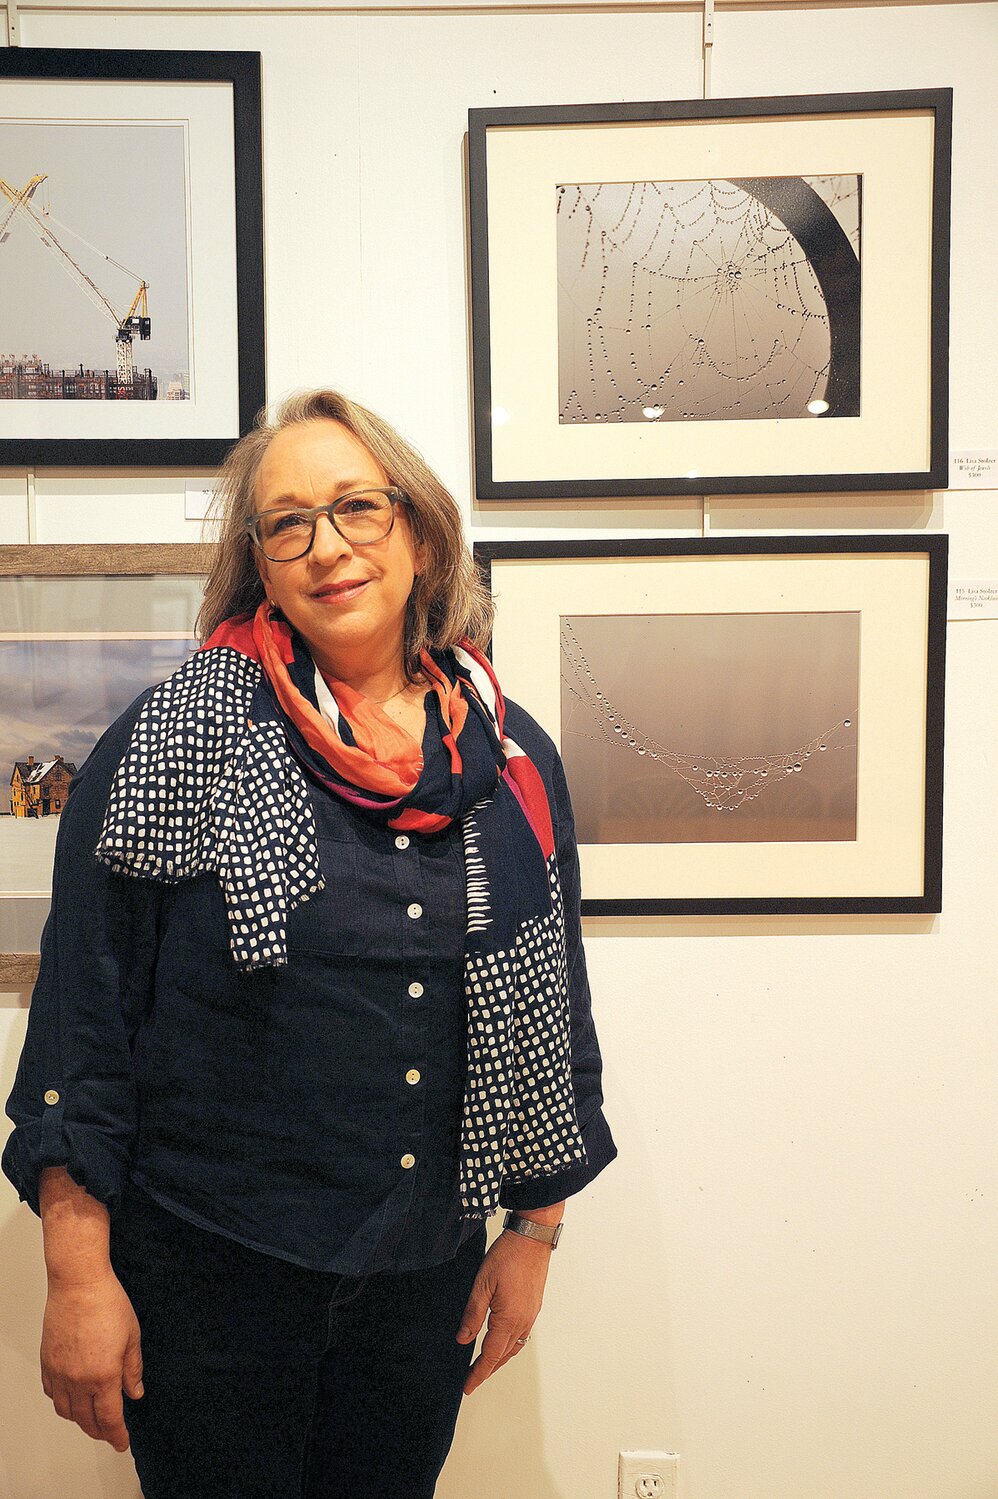 Lisa Stolzer next to her photographs, “Web of Jewels” and “Morning’s Necklace,” which won the Nature Award.